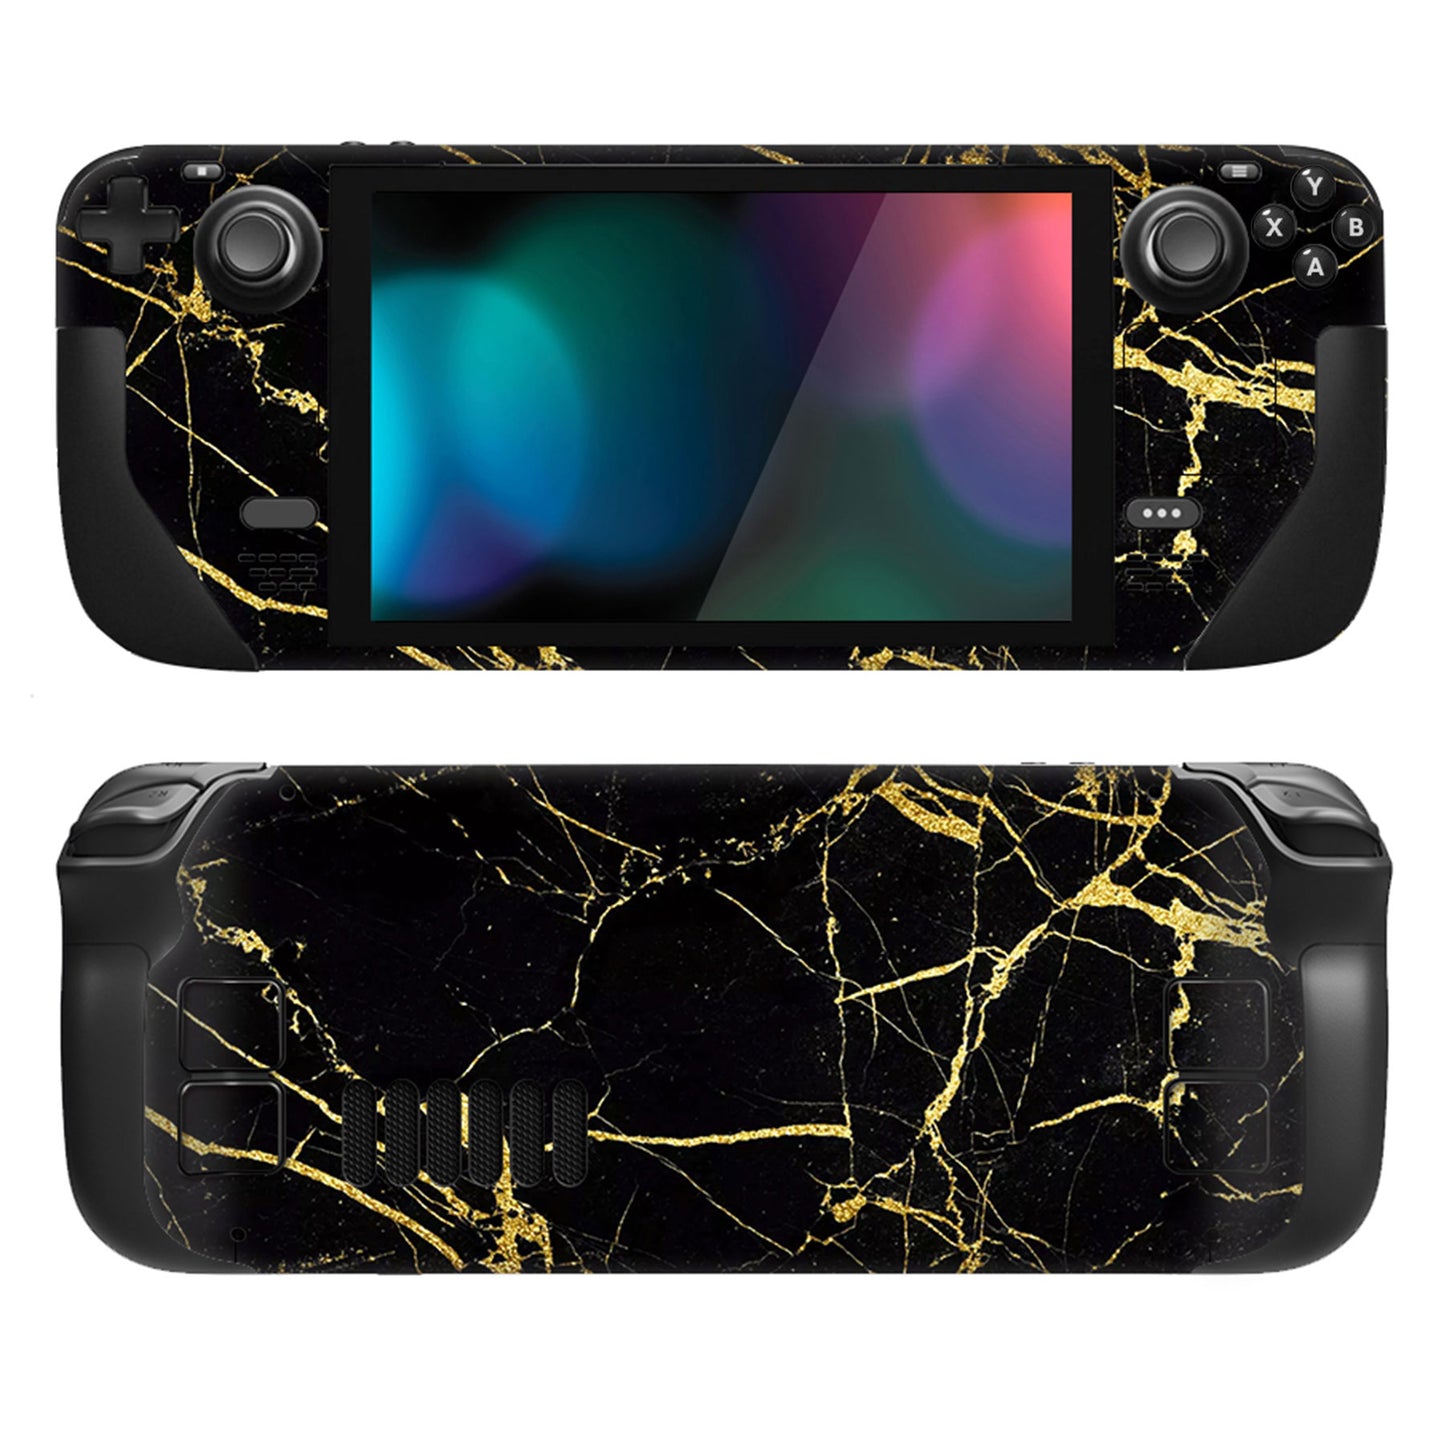 PlayVital Full Set Protective Skin Decal for Steam Deck, Custom Stickers Vinyl Cover for Steam Deck Handheld Gaming PC - Black & Gold Marble Effect - SDTM009 playvital